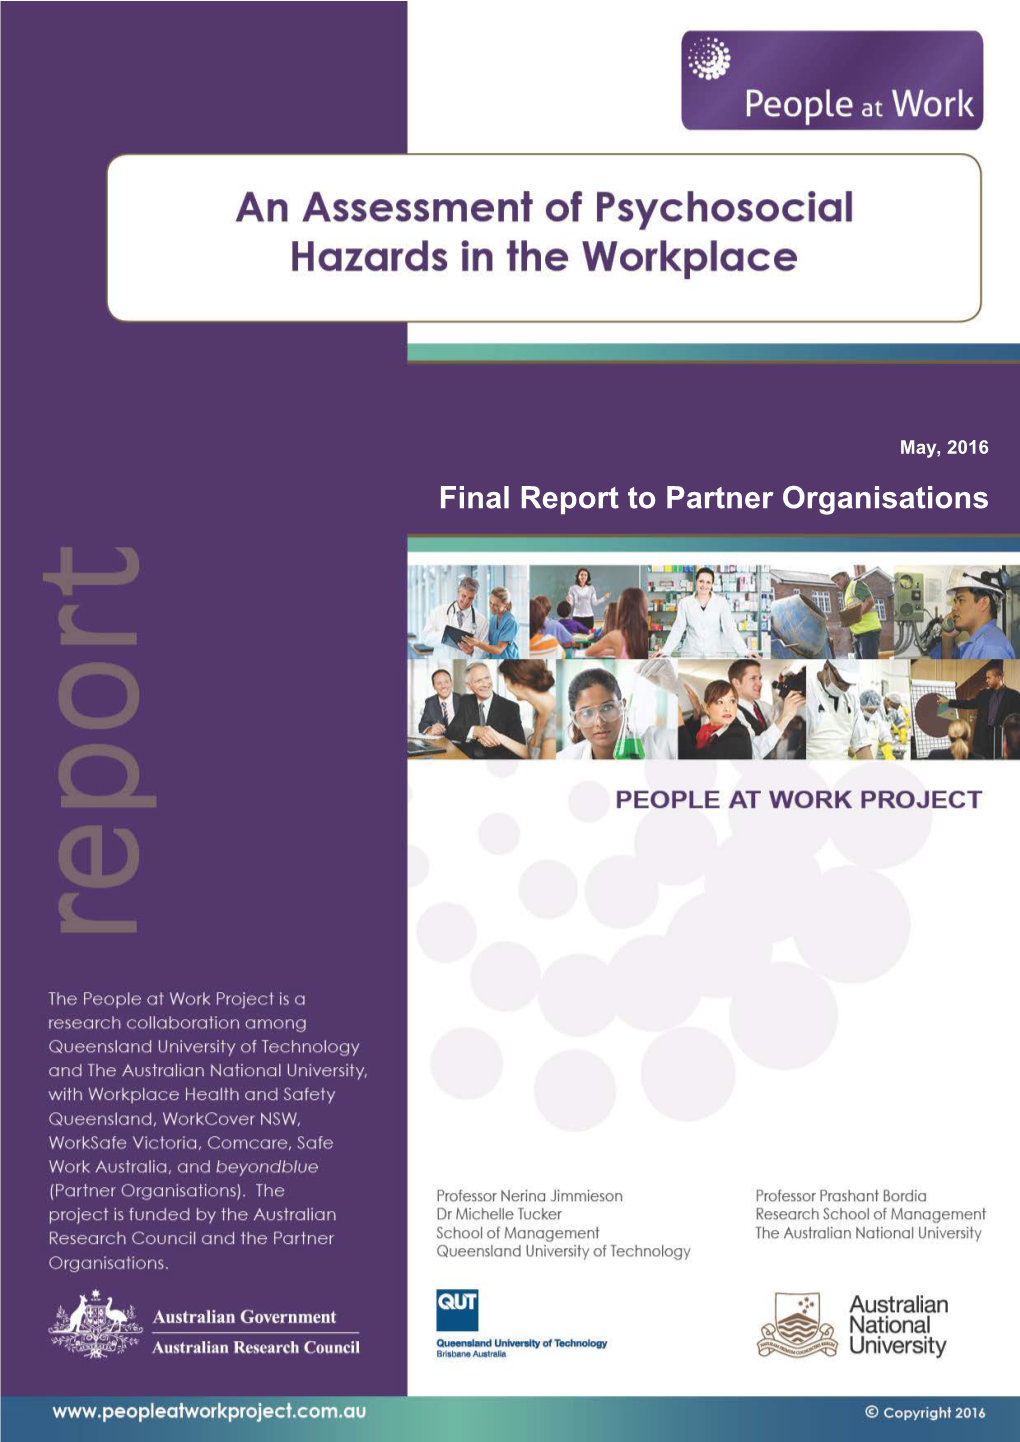 An Assessment of Psychosocial Hazards in the Workplace